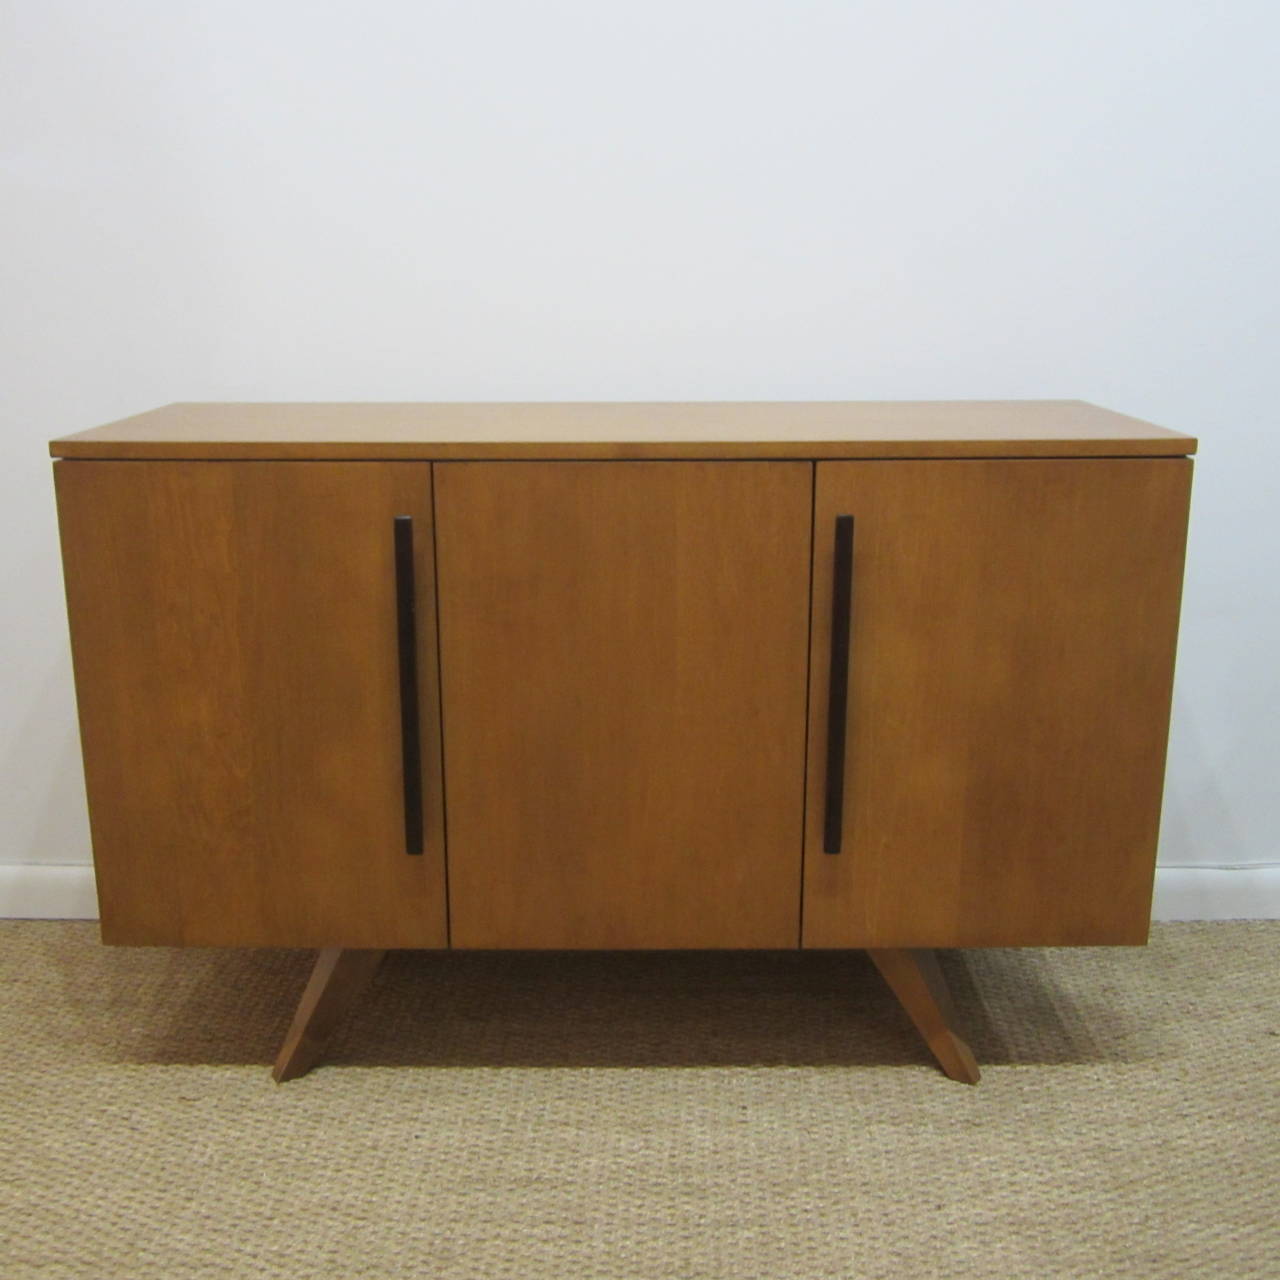 Three-door cabinet made of ash wood with a continuous interior shelf. Original cleat door pulls in a darker wood. Excellent original condition. Great as a server as well as a general store-all.